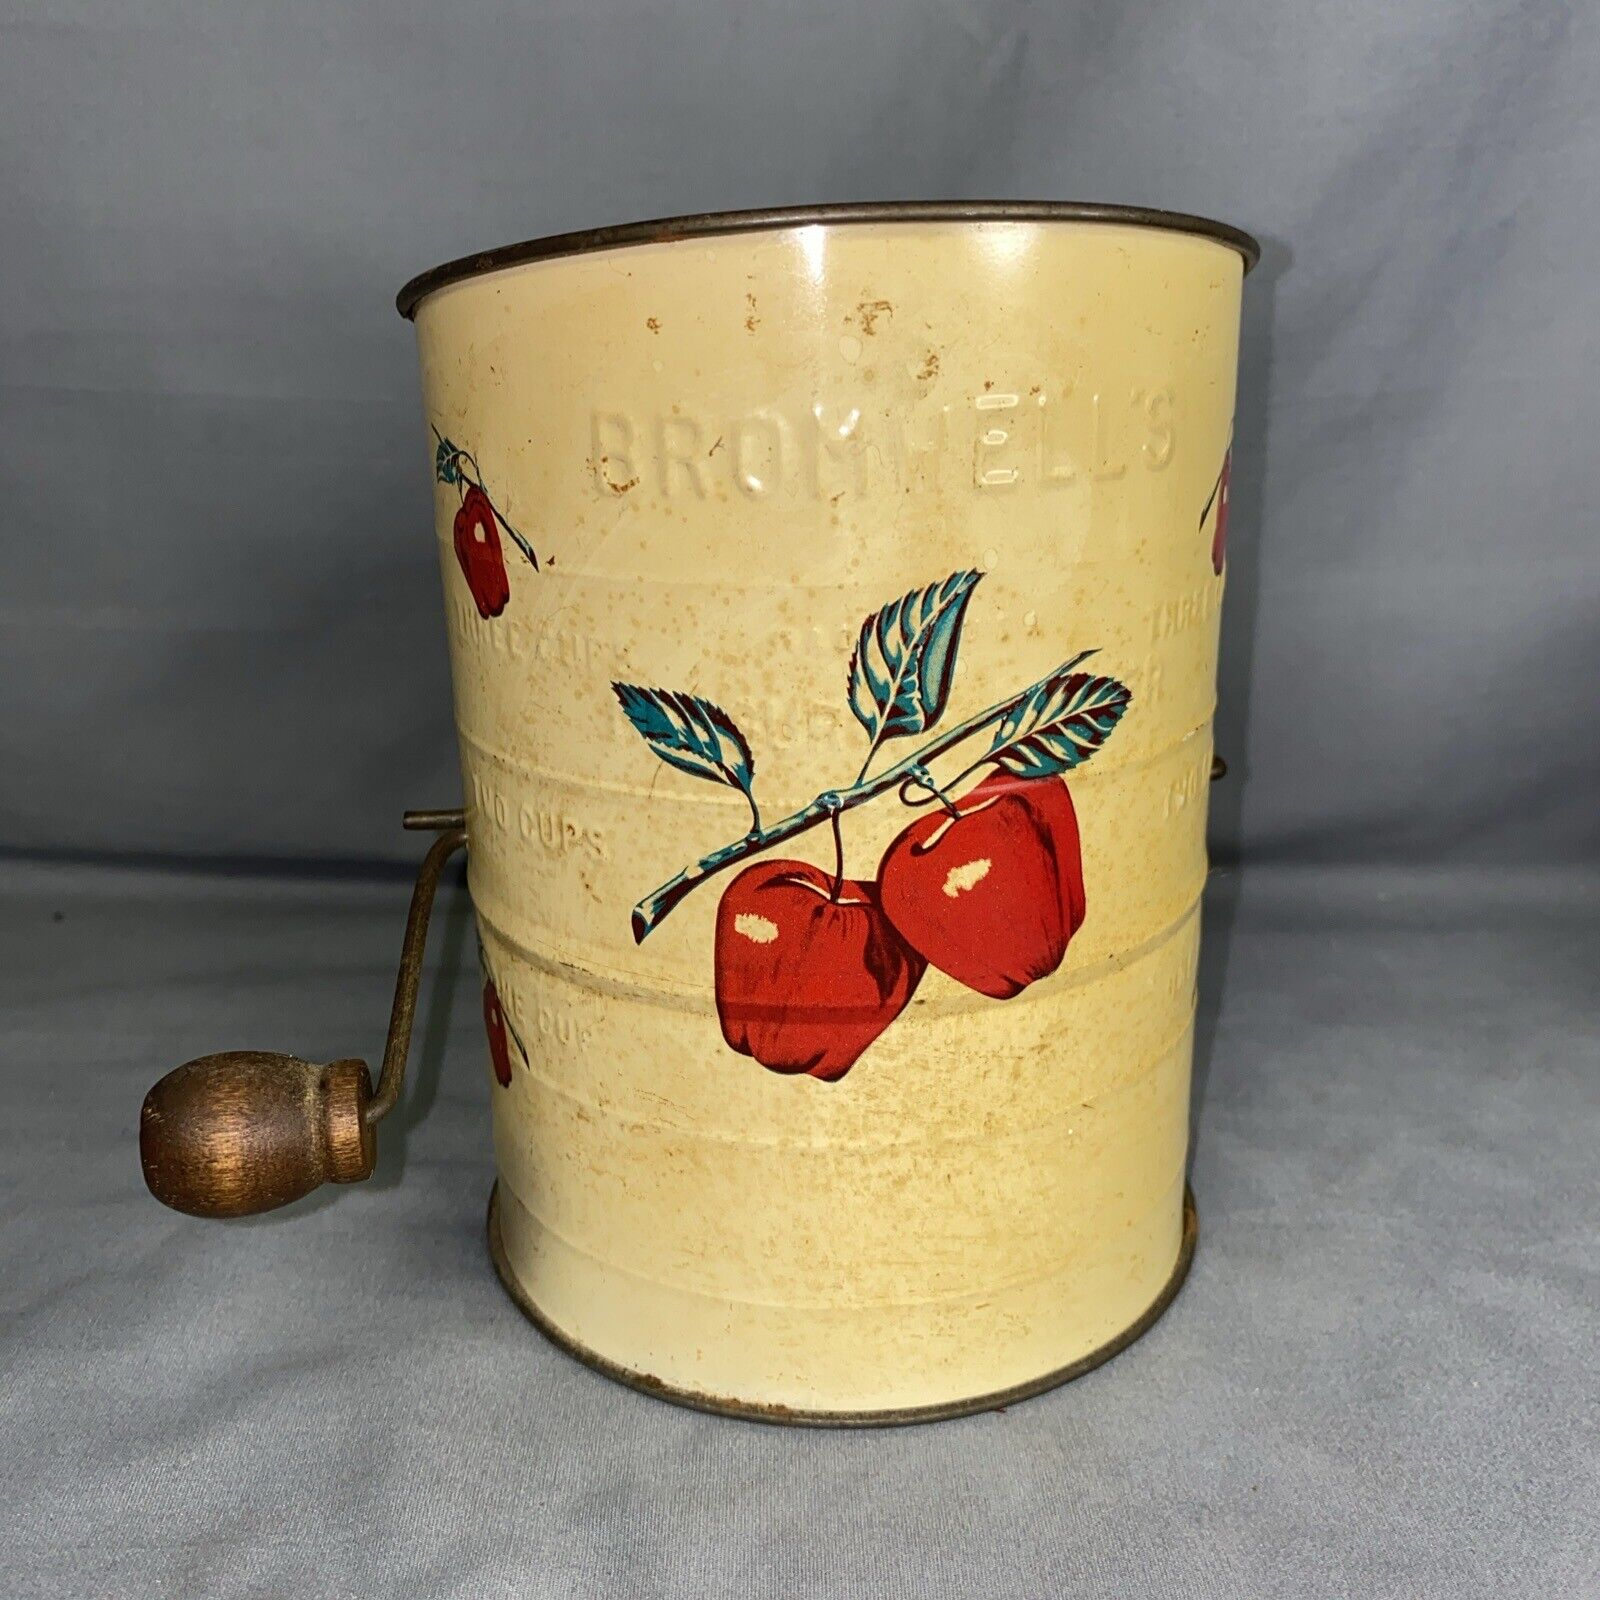 Vintage Bromwell's 3 Cup Flour Sifter w/ Apple Design Red Wood Crank Handle